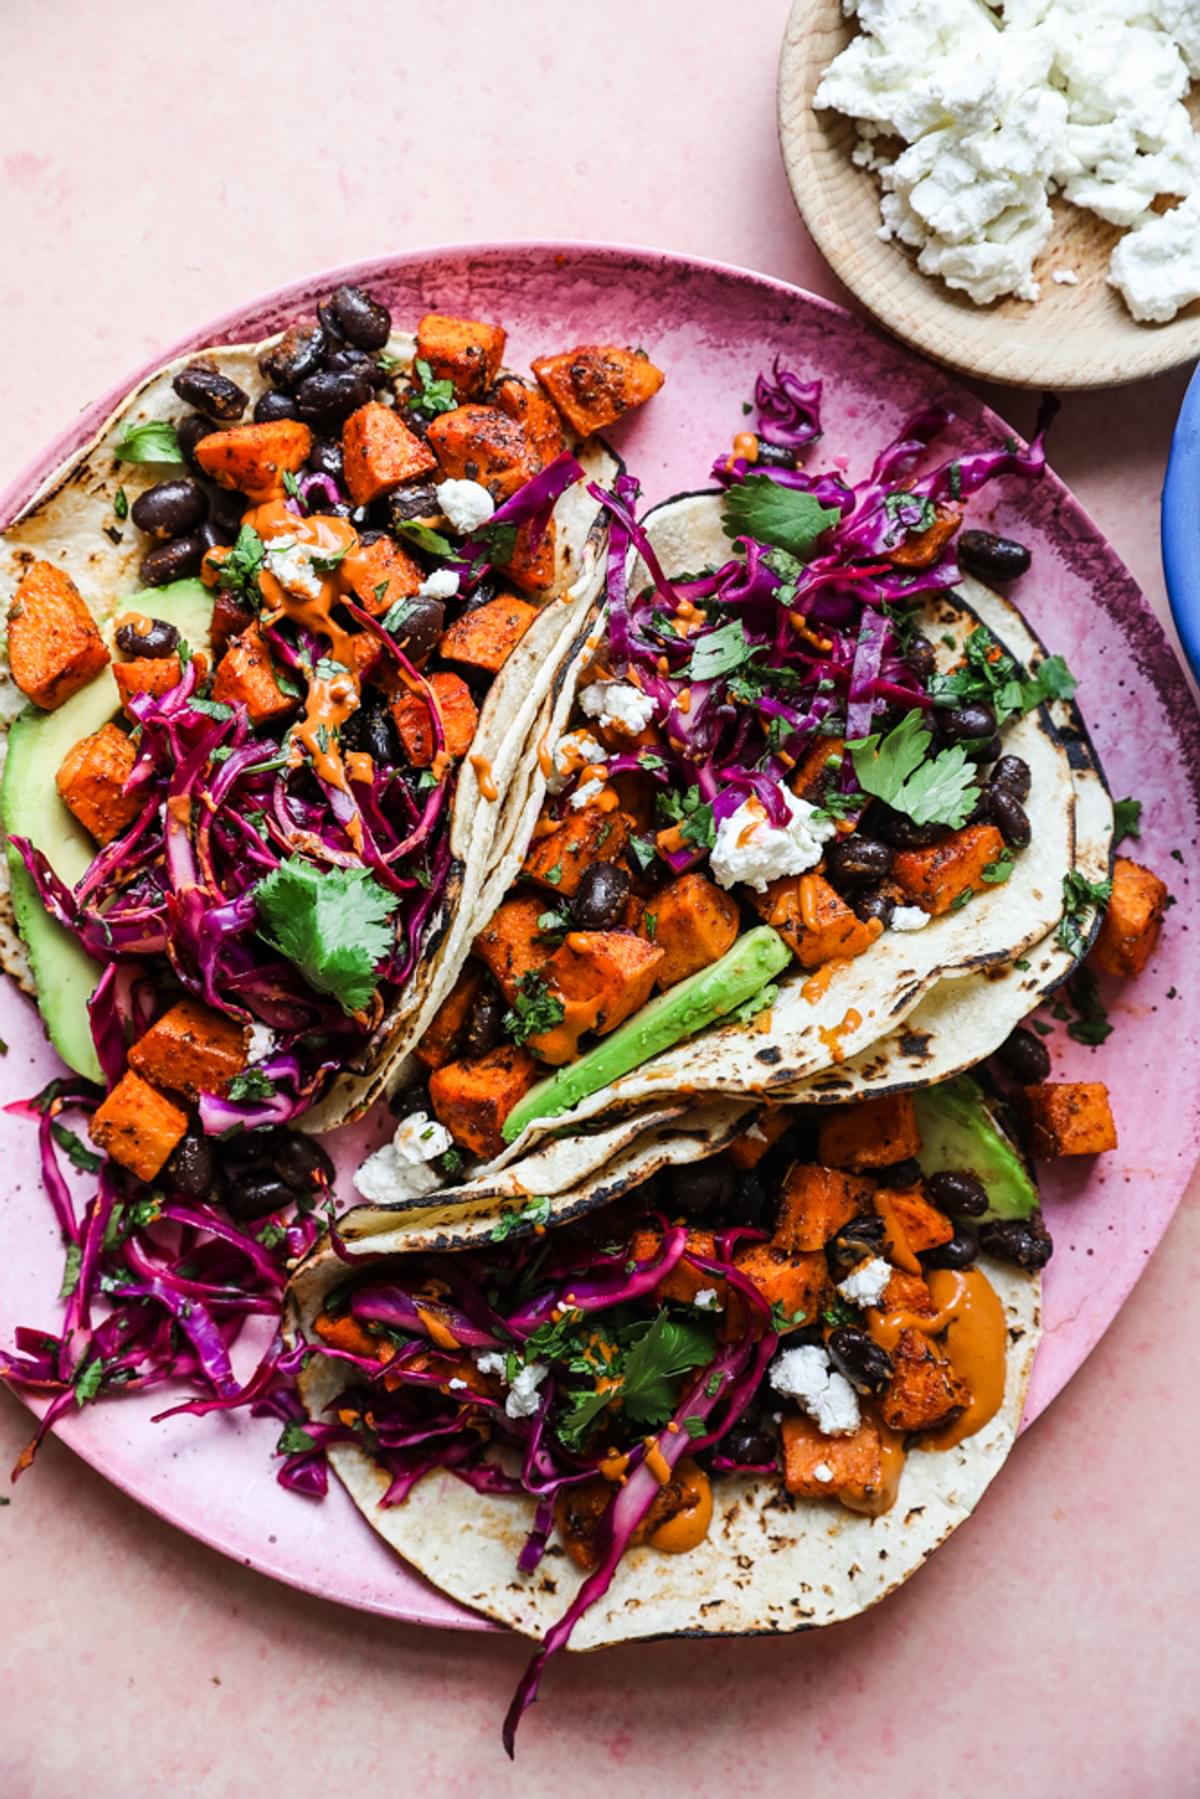 sweet potato tacos with goat cheese, black beans and avocado